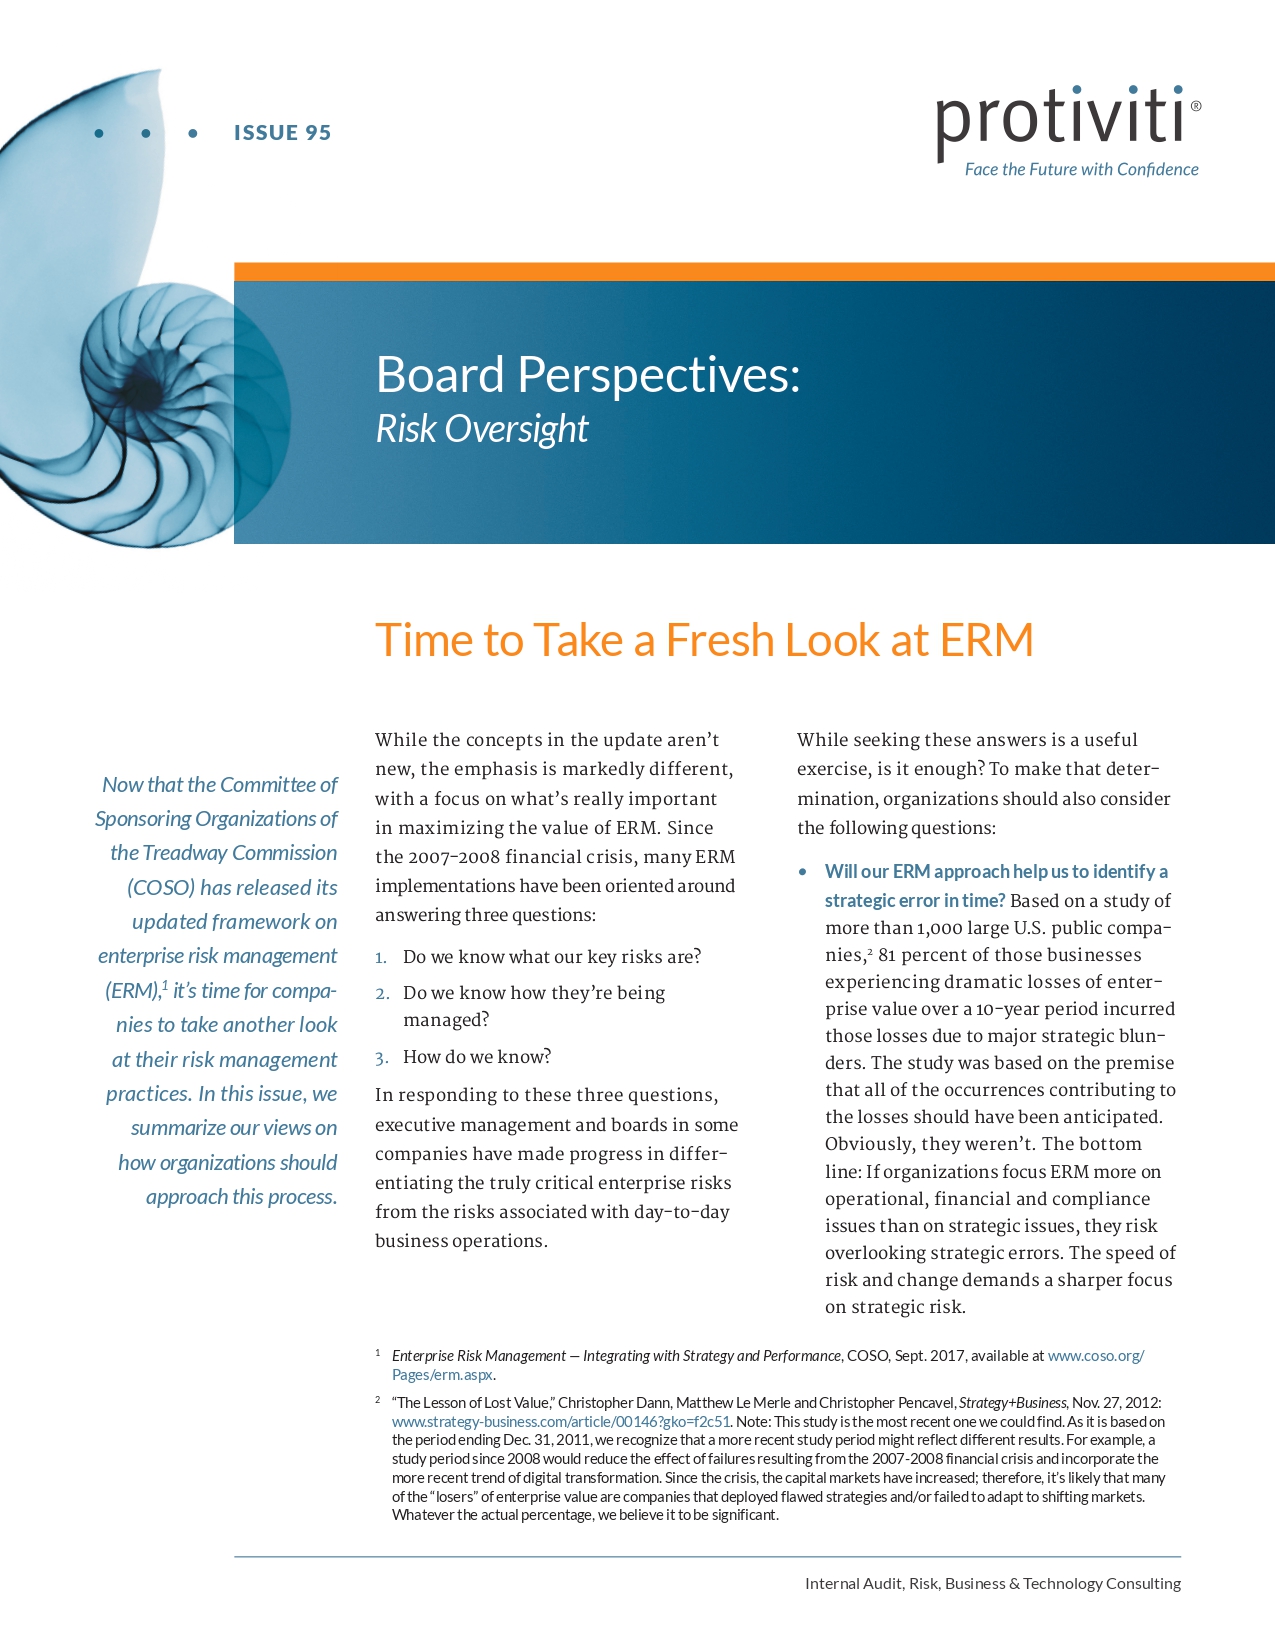 Screenshot of the first page of Time to Take a Fresh Look at ERM